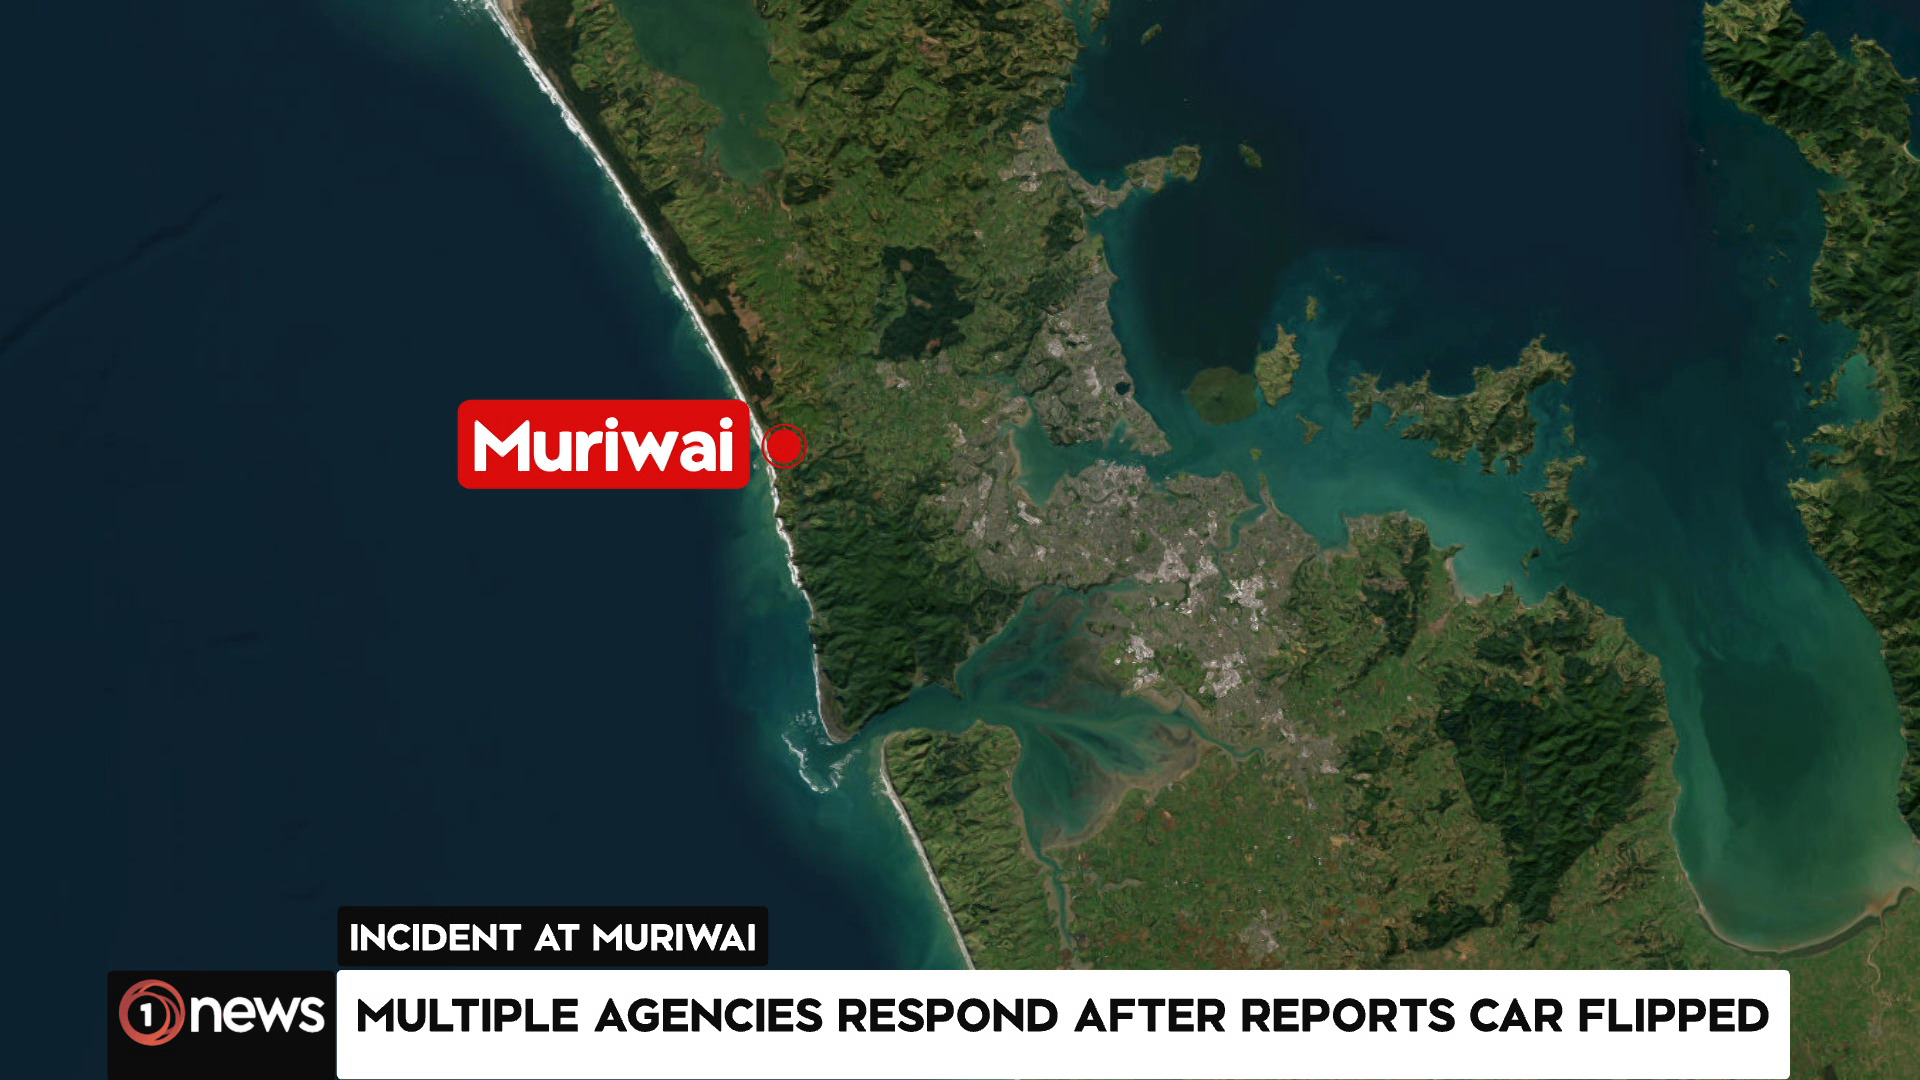 Muriwai beach incident, Prompts Major Emergency Response